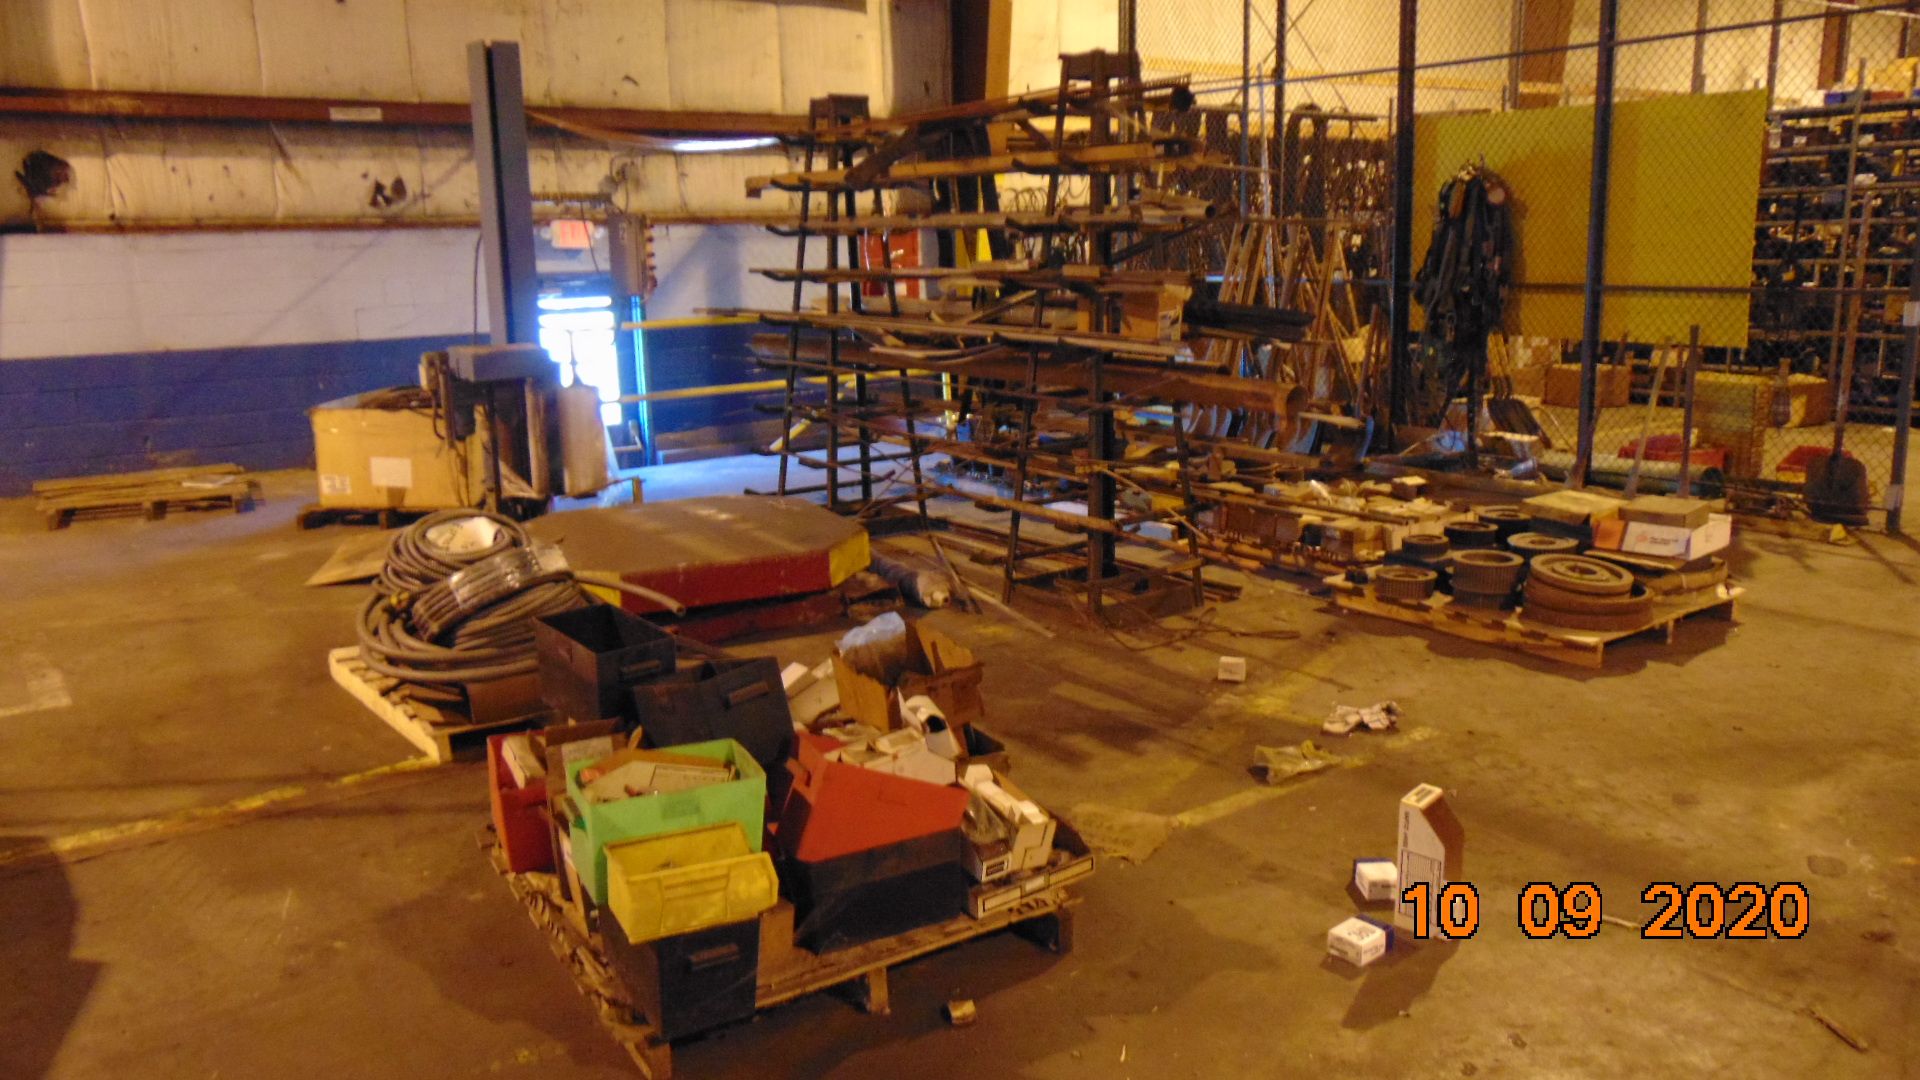 Contents of Warehouse / Industrial Building - Image 19 of 26